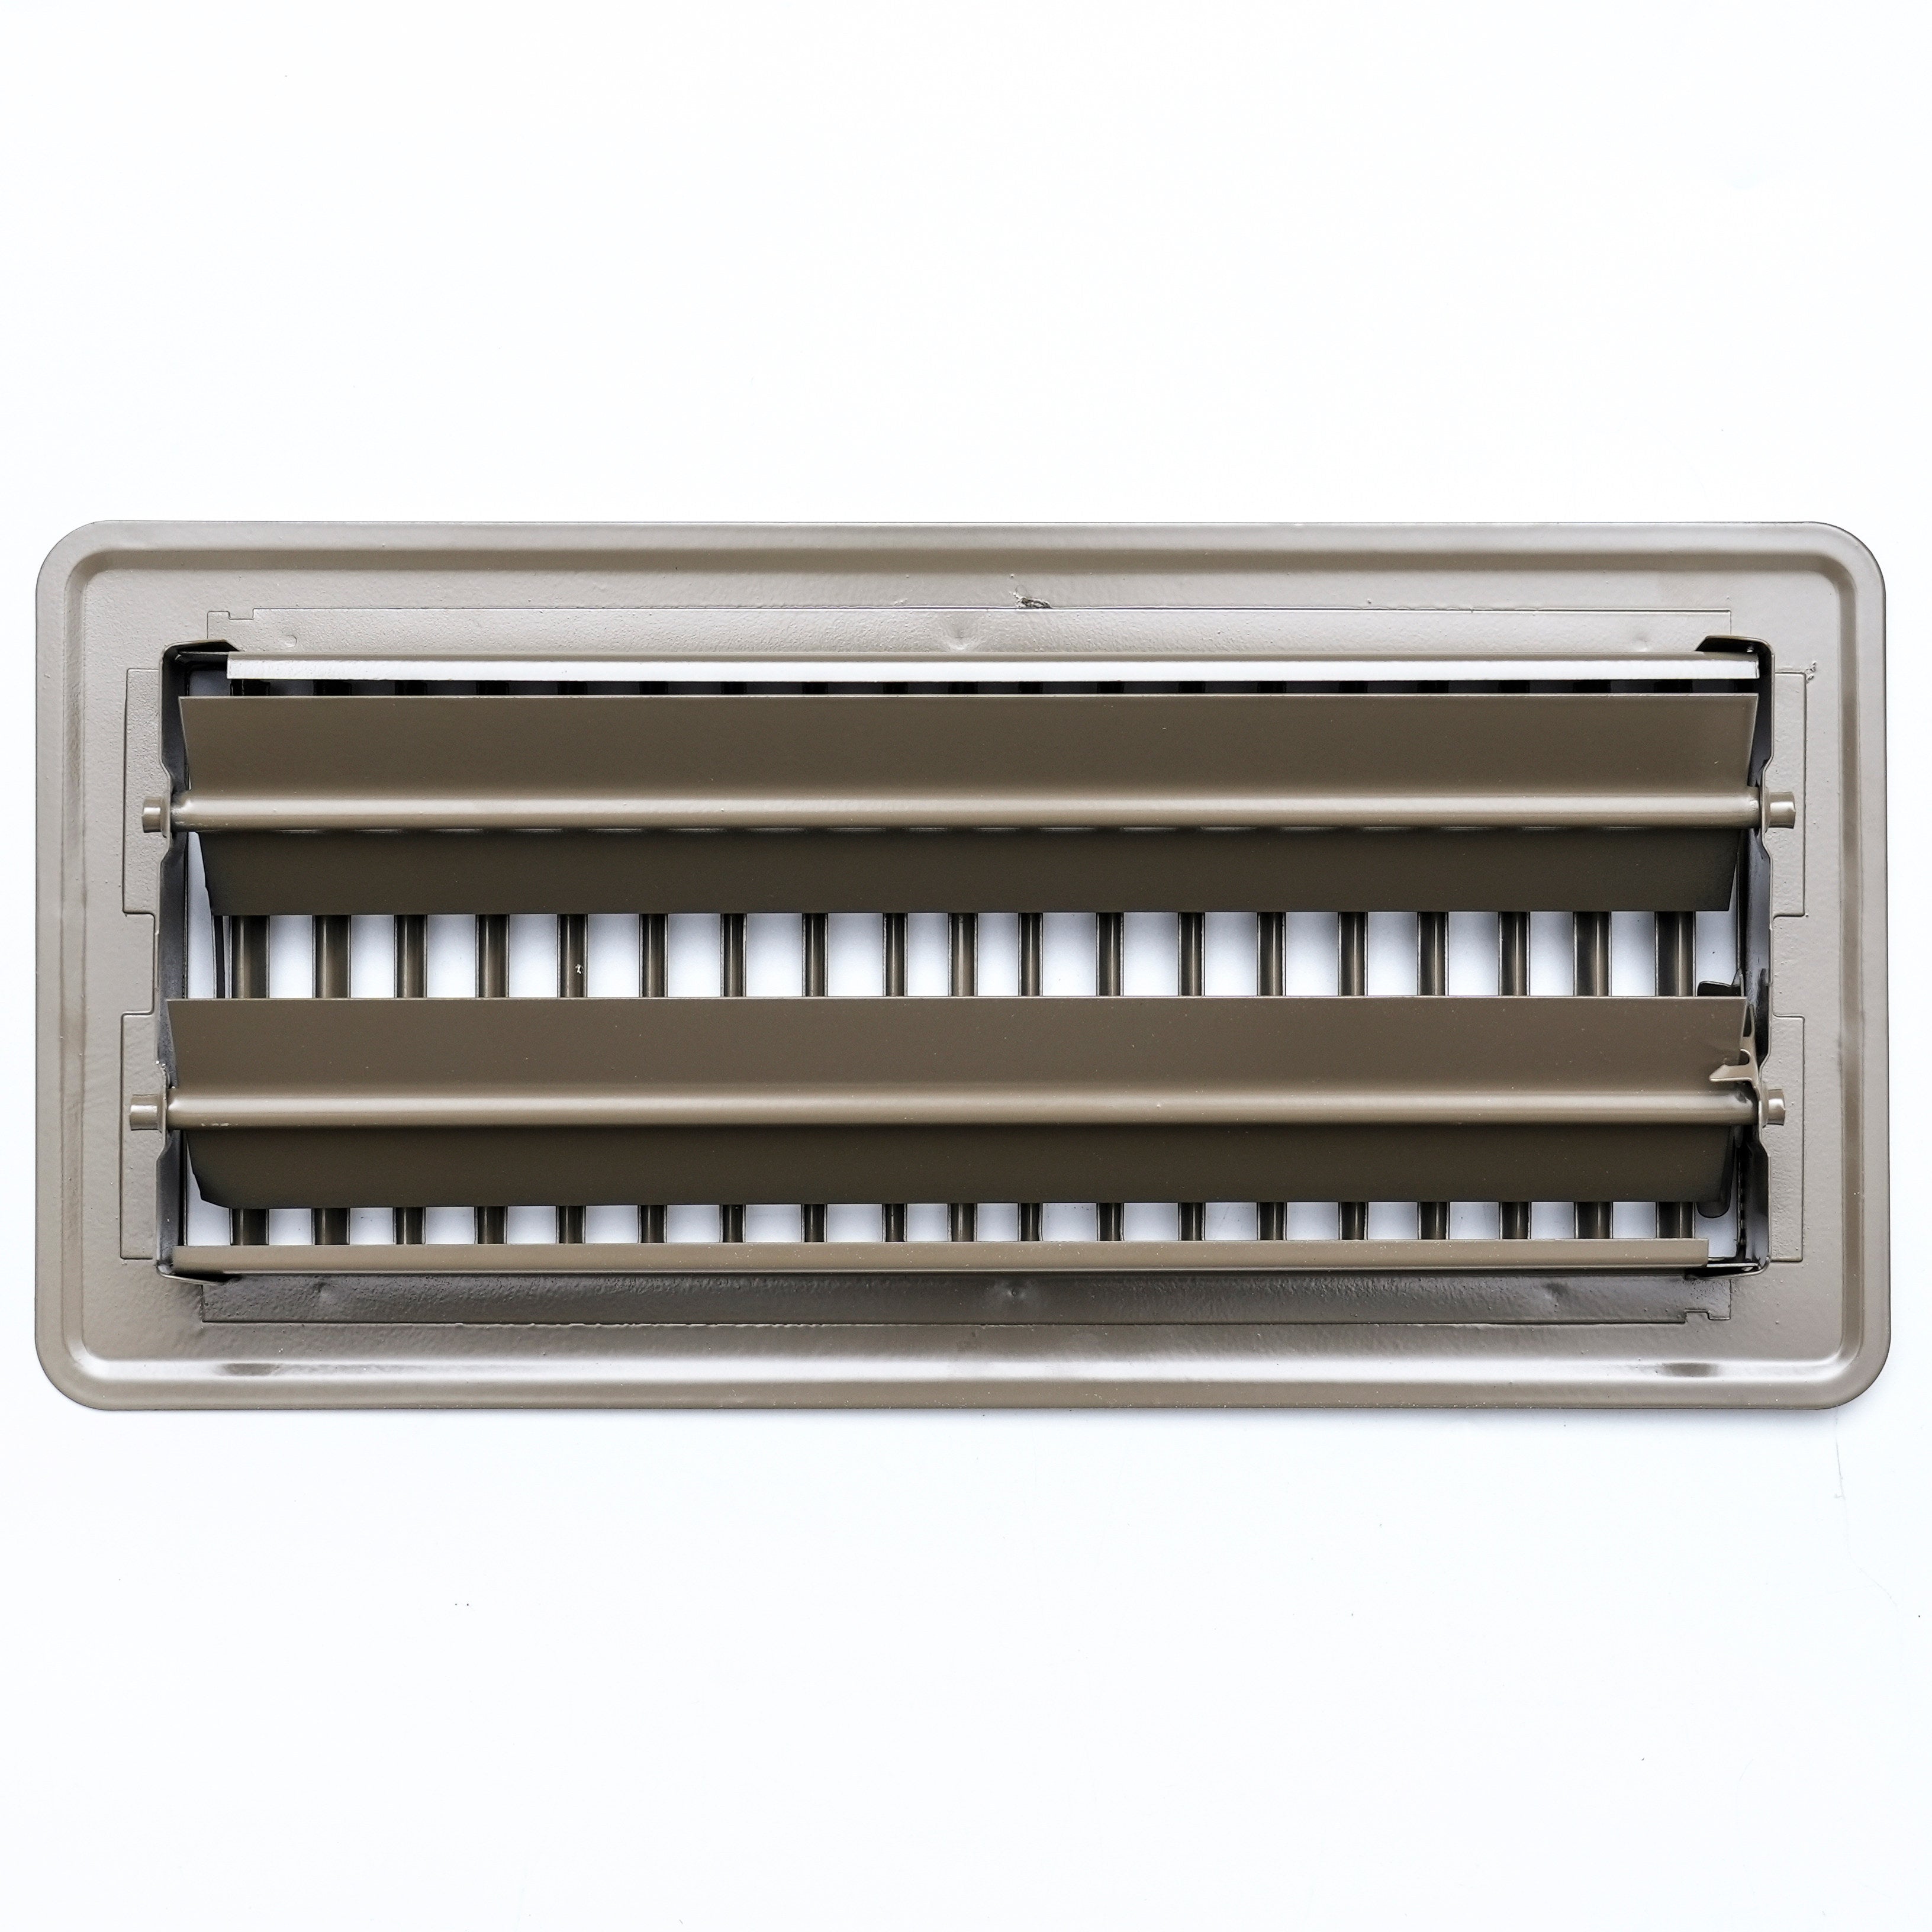 4" x 10"  Floor Register with Louvered Design | Heavy Duty Walkable Design with Damper | Floor Vent Grille | Easy to Adjust Air Supply lever | Brown